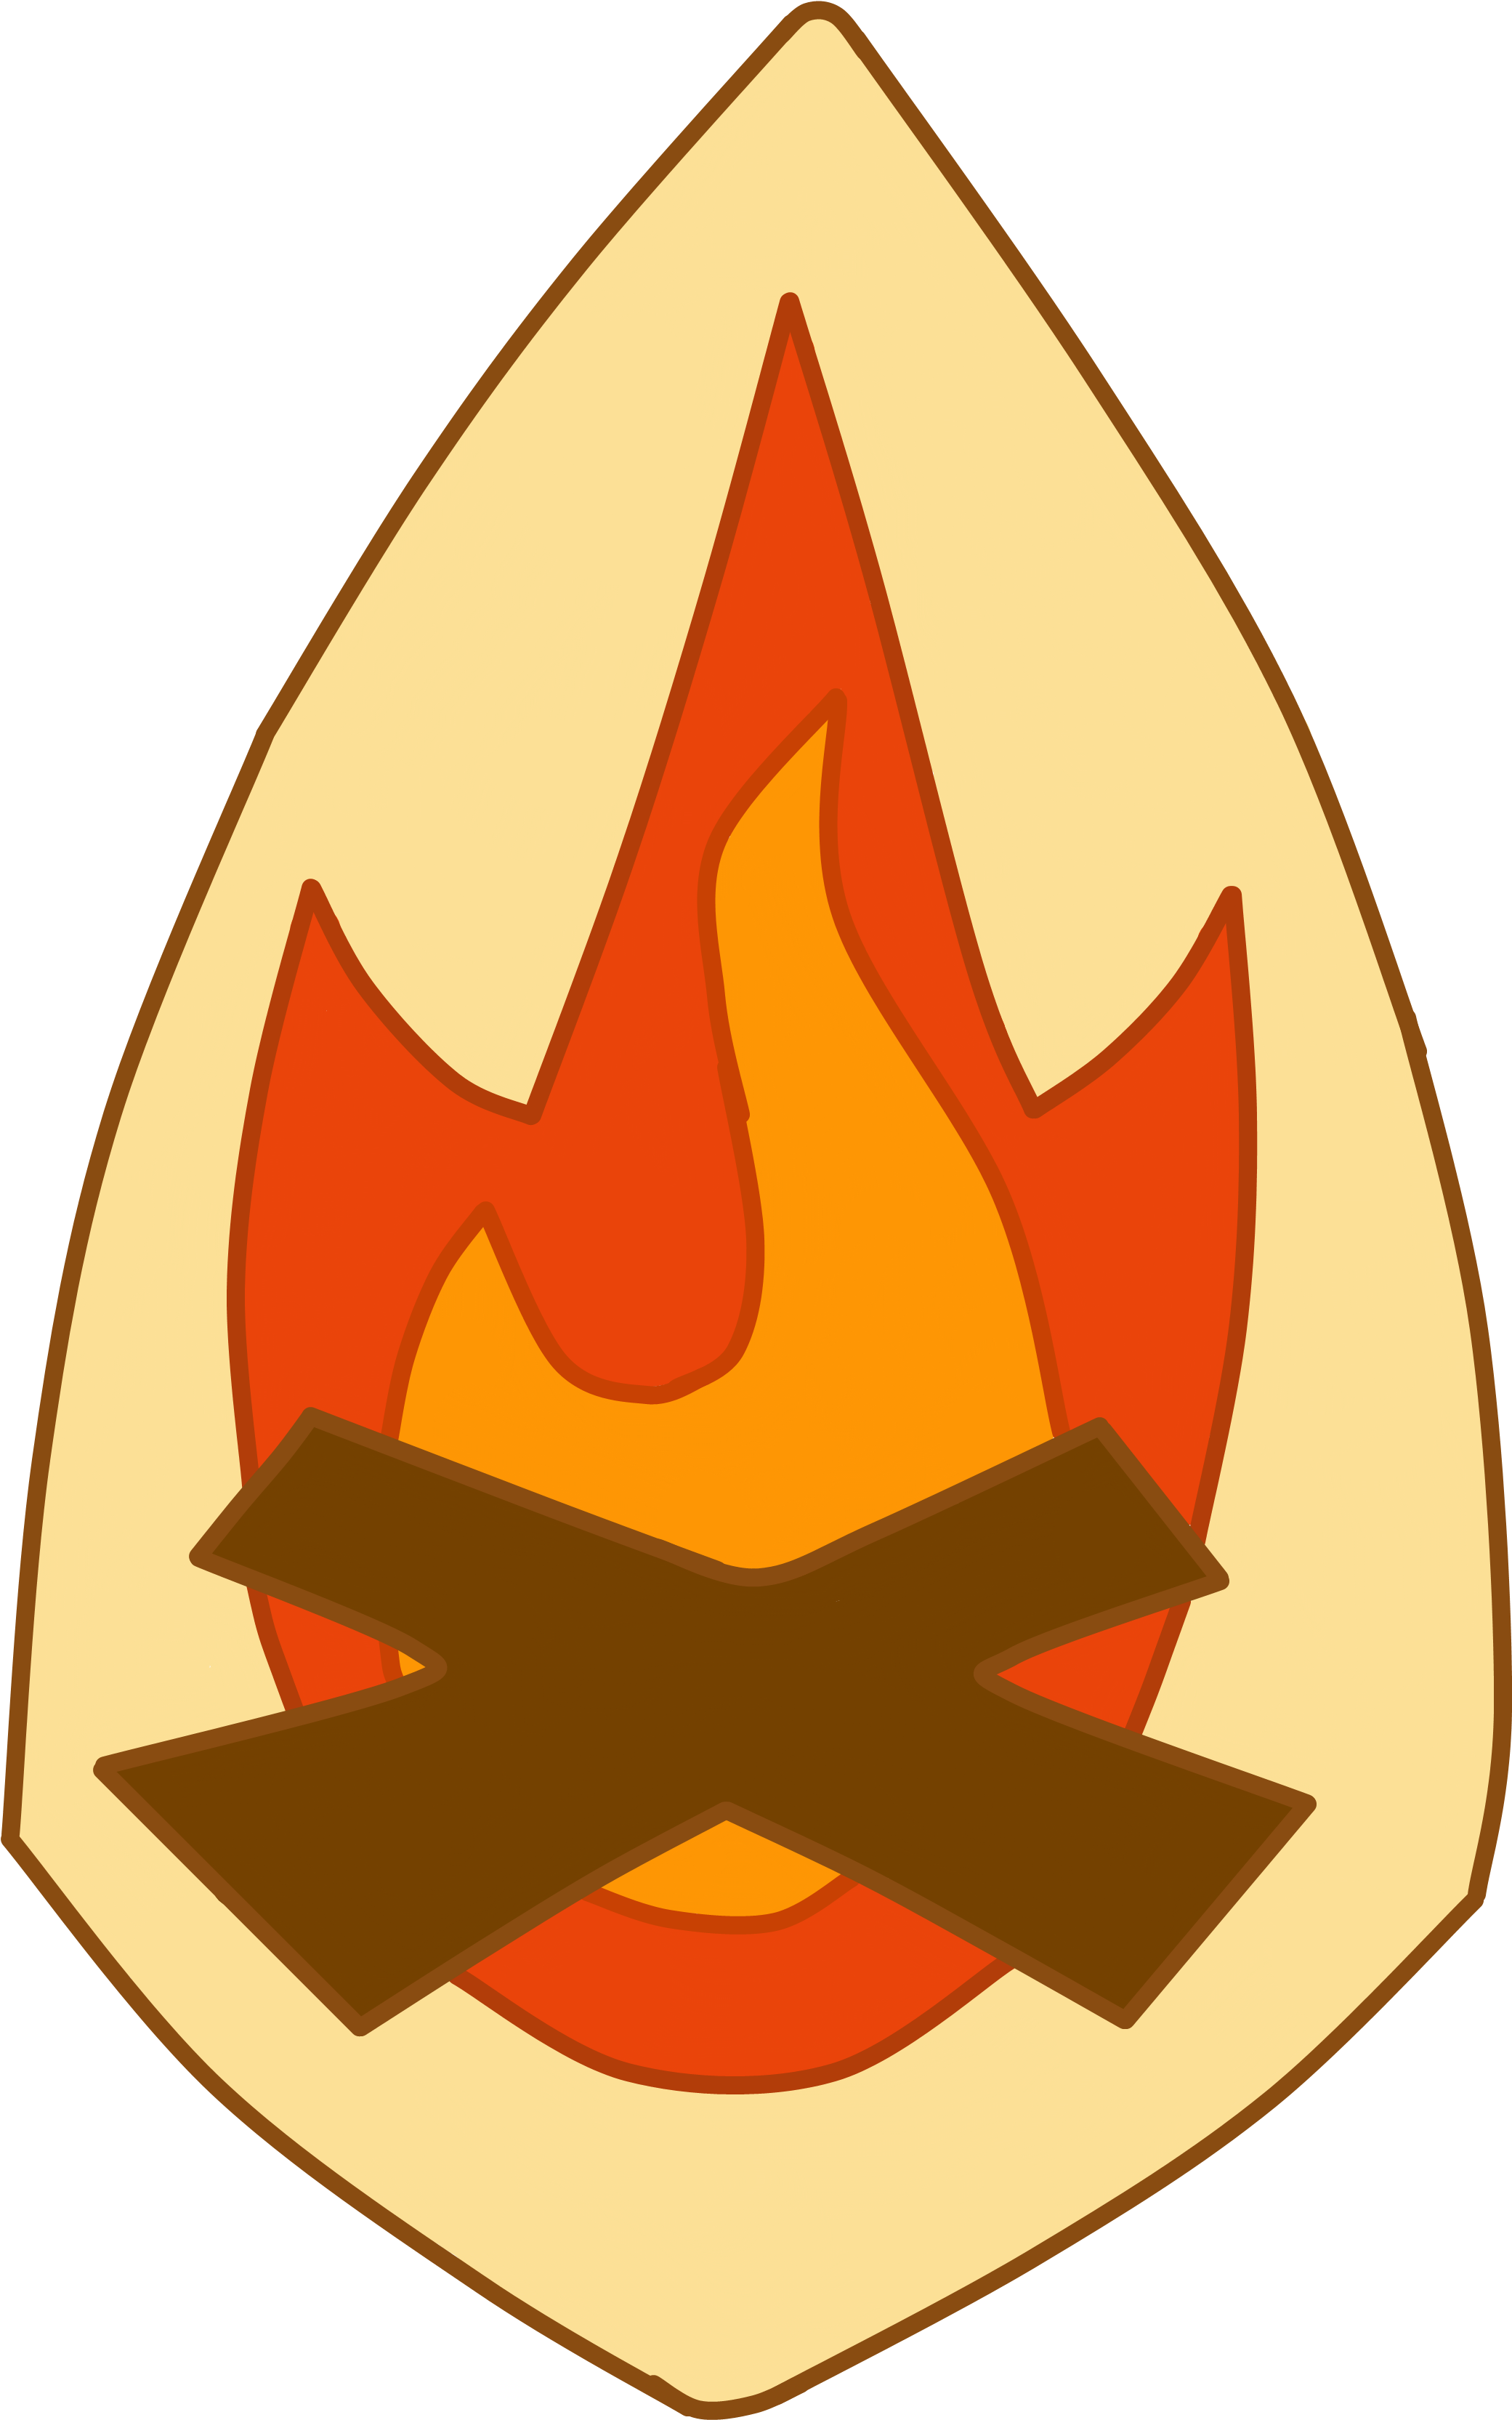 Campfire Clipart Fireside Pencil And In Color Campfire - Phineas And Ferb Fireside Girls (2600x3400)